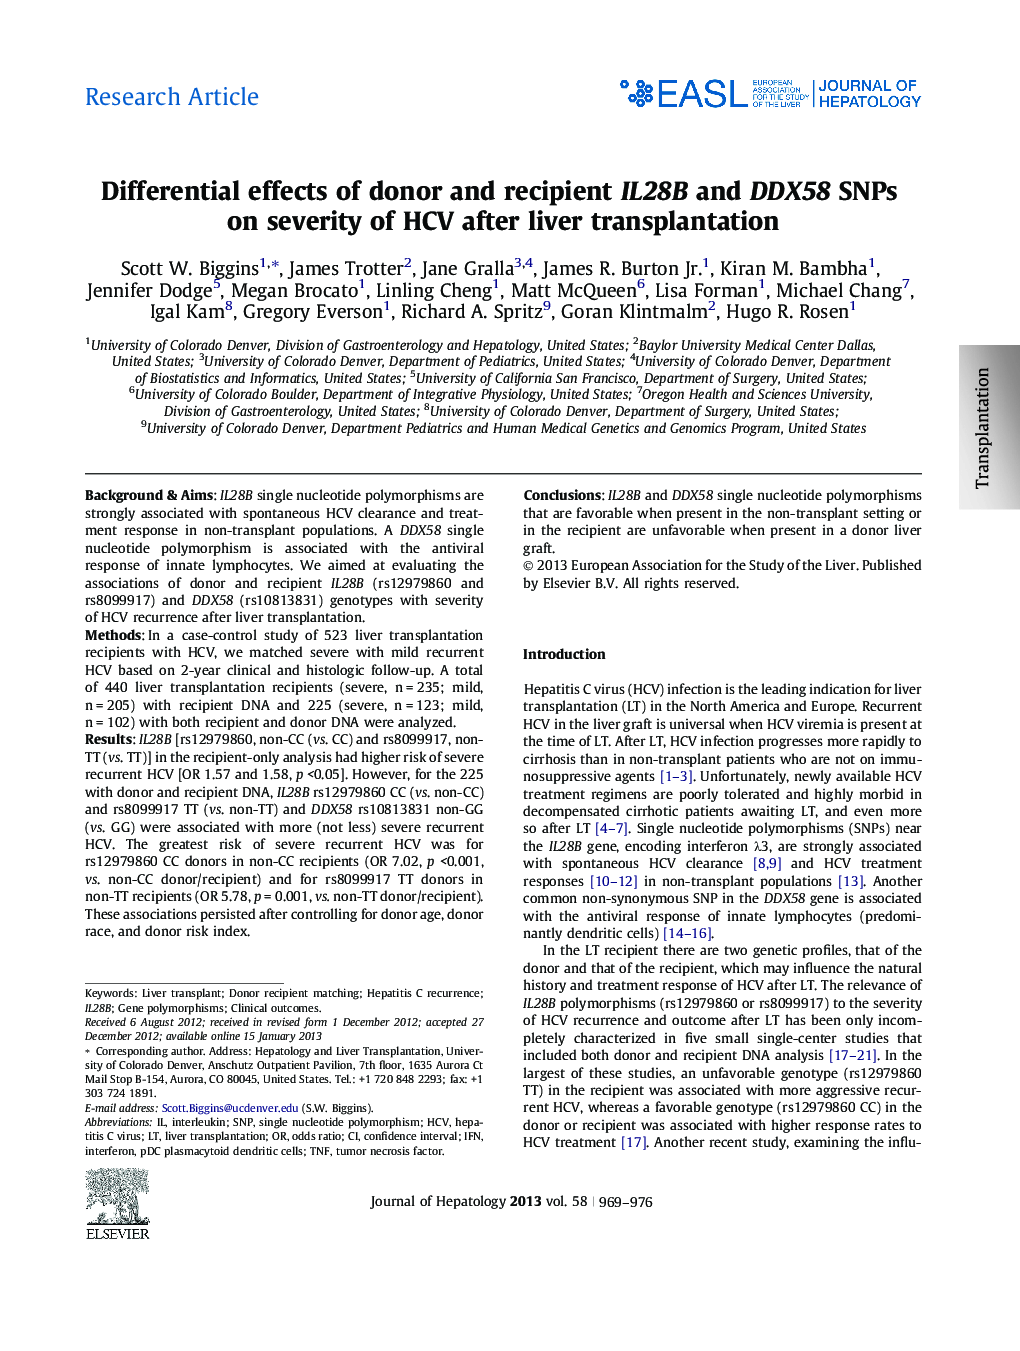 Research ArticleDifferential effects of donor and recipient IL28B and DDX58 SNPs on severity of HCV after liver transplantation